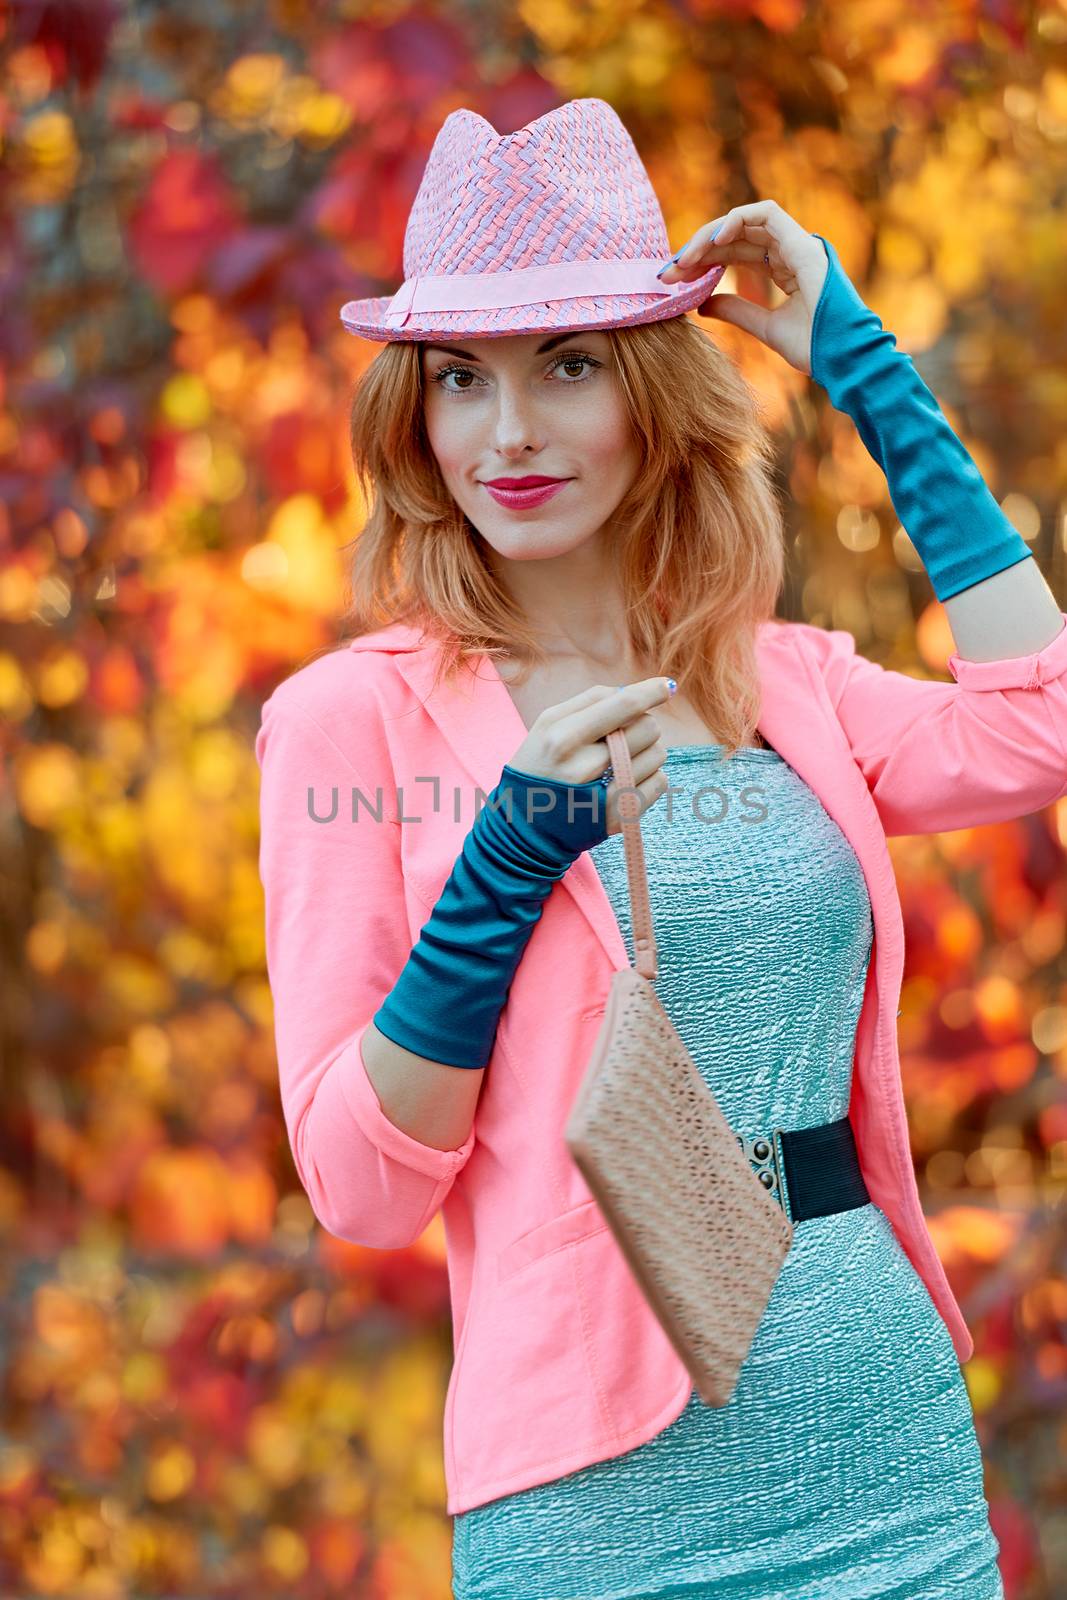 Fashion urban beauty people, smiling woman, outdoor. Playful glamor hipster redhead girl. Stylish hat vivid jacket, gloves and clutch. Sunny day, autumn orange bokeh. Creative unusual, park, lifestyle